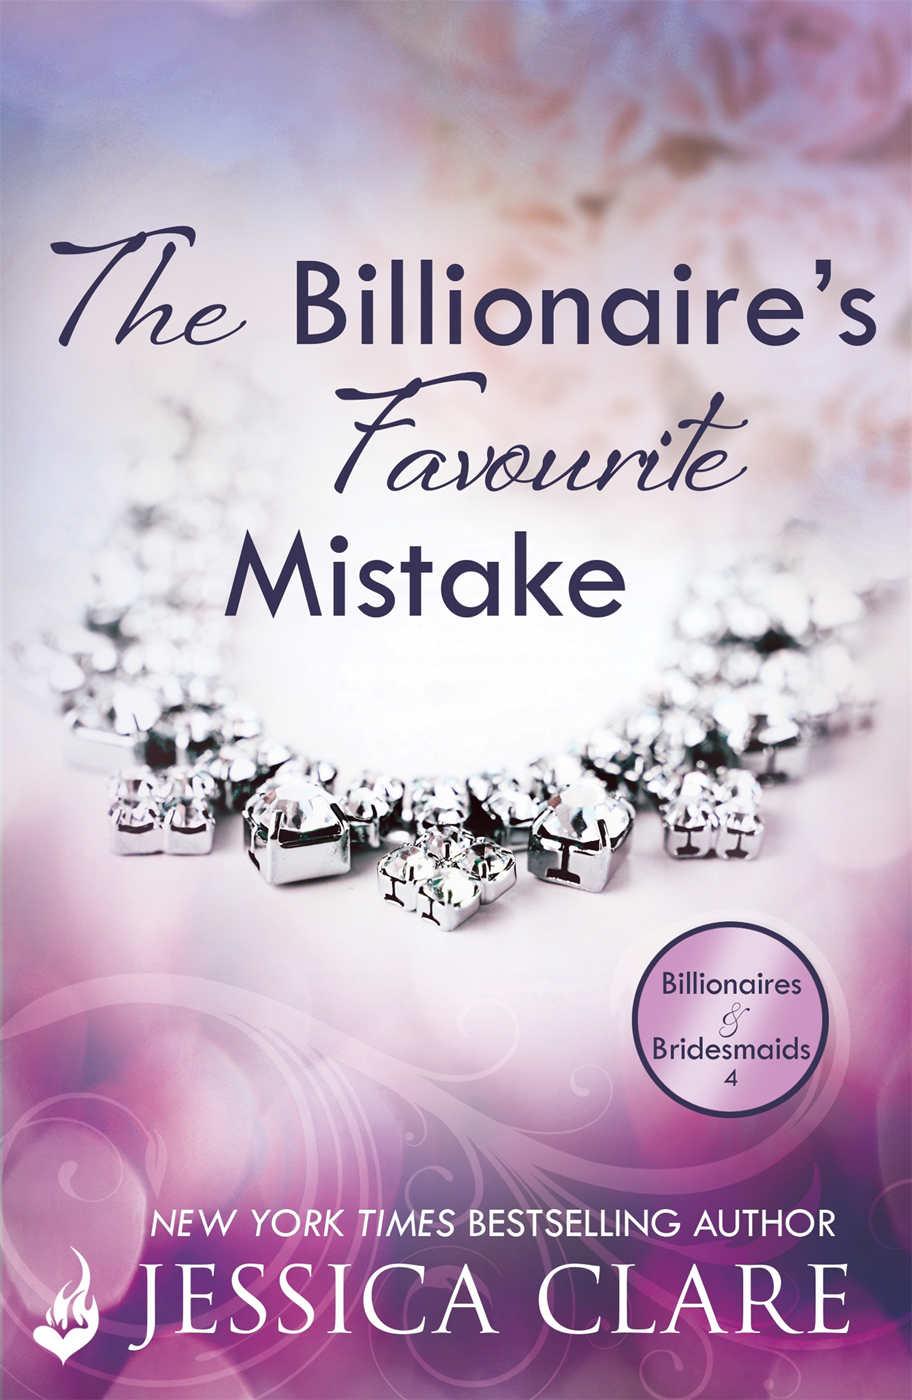 The Billionaire's Favourite Mistake: Billionaires and Bridesmaids 4 by Jessica Clare